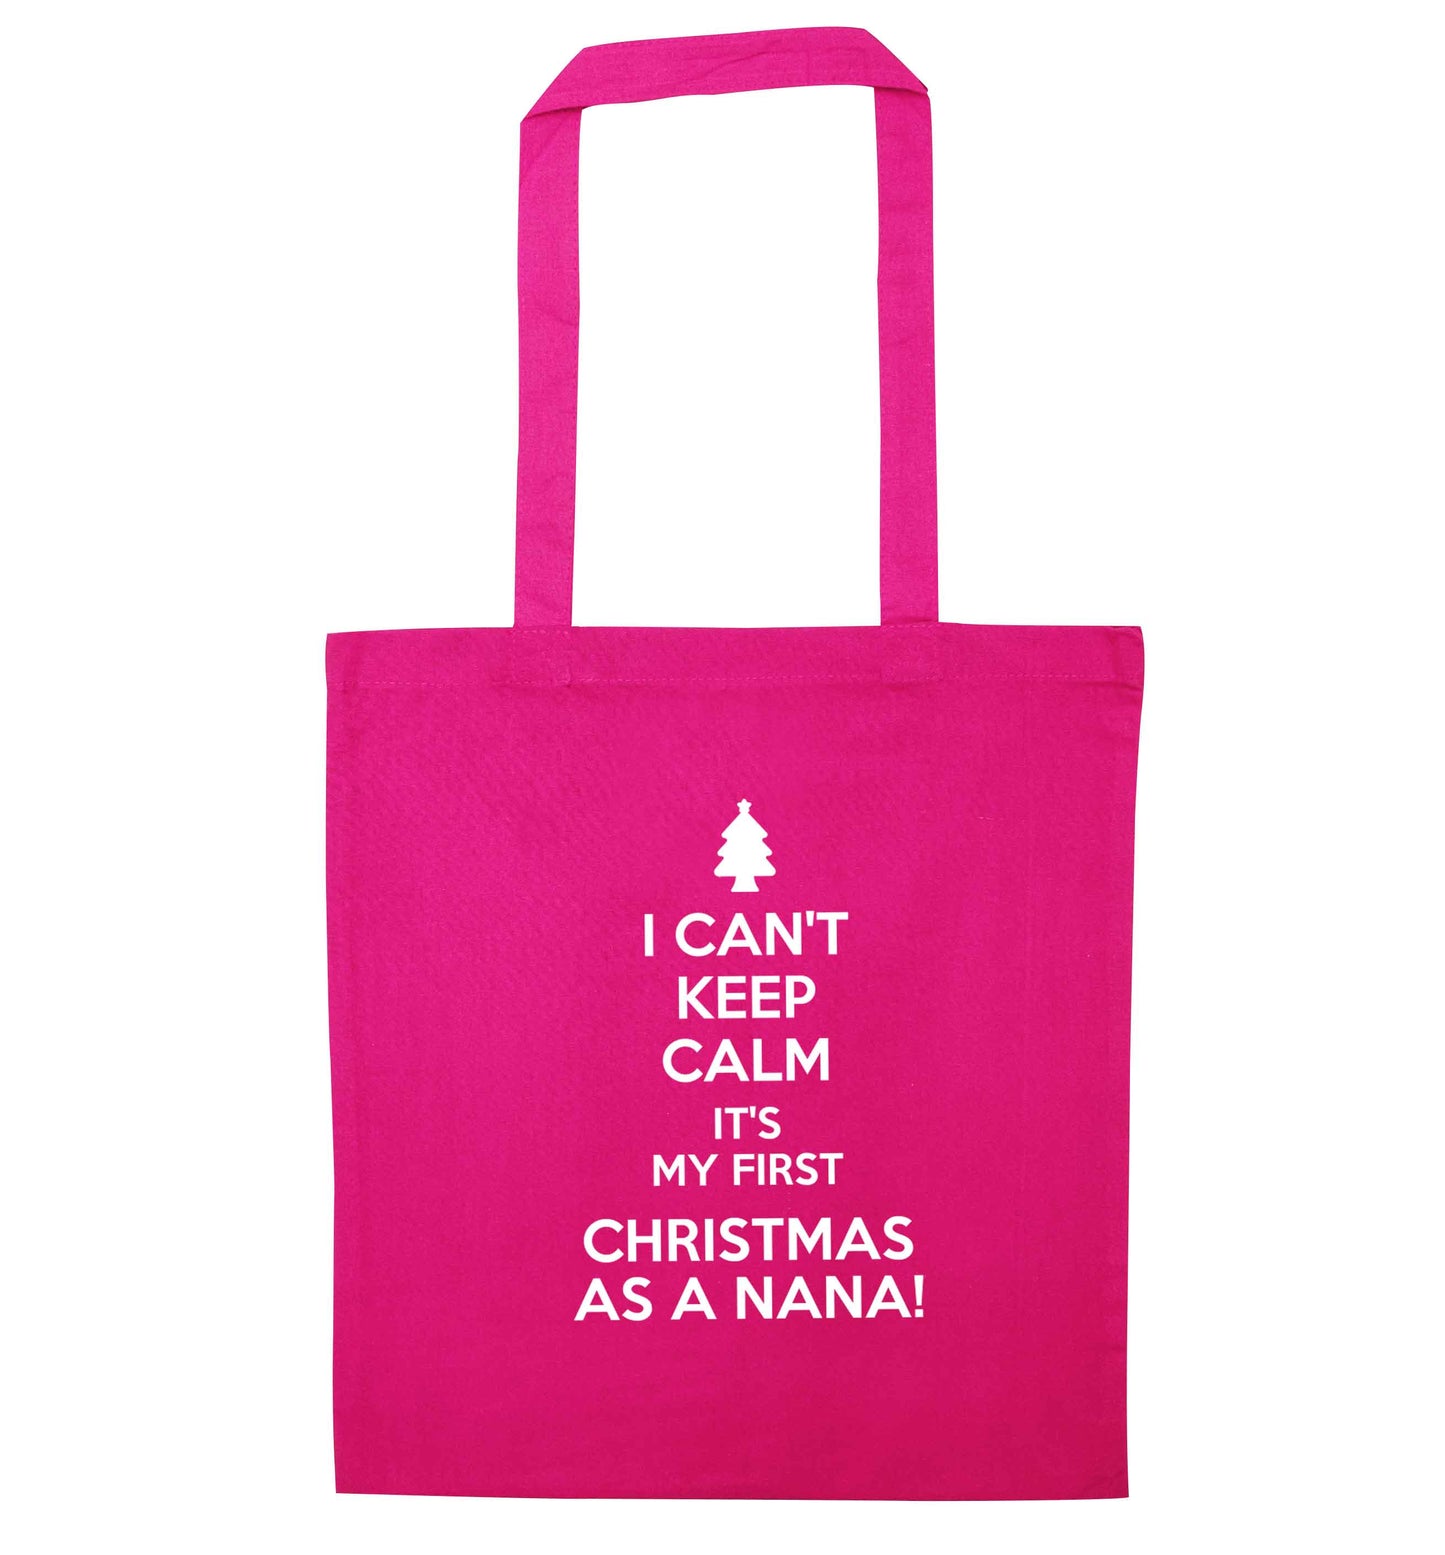 I can't keep calm it's my first Christmas as a nana! pink tote bag